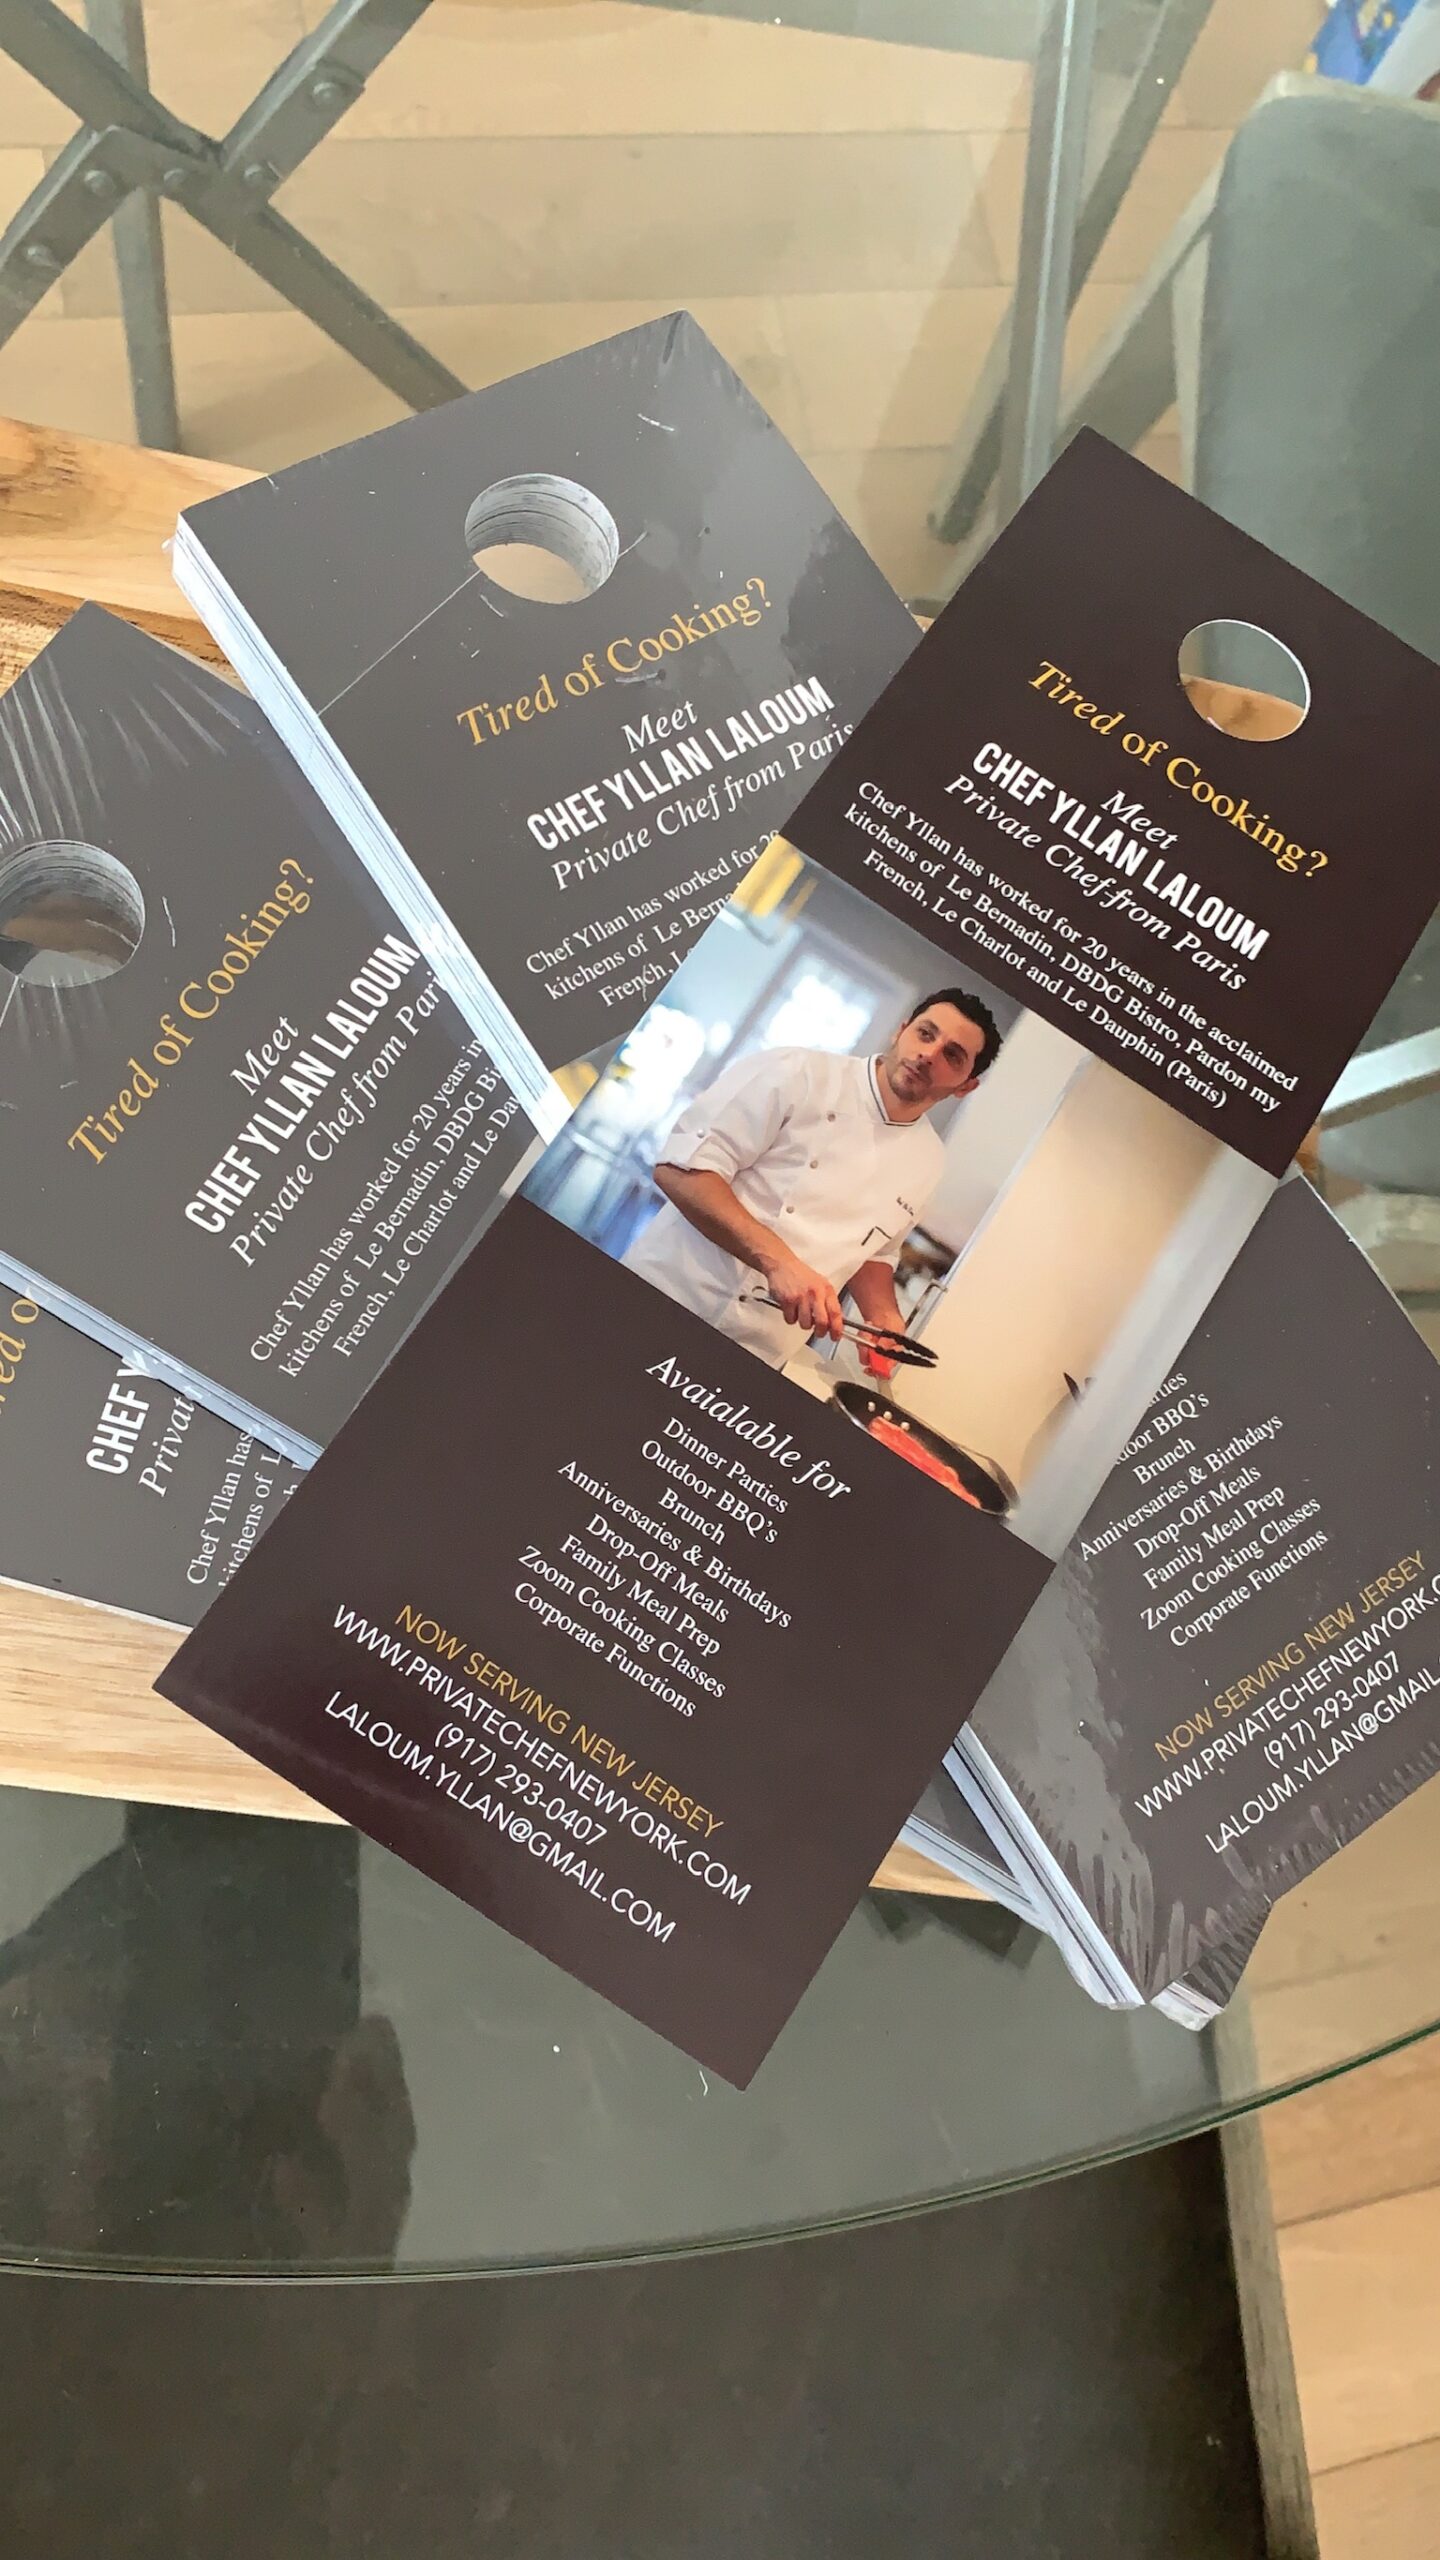 Private Chef Yllan Laloum has created  flyers to help his clients discover him in New York, New Jersey and Long Island.